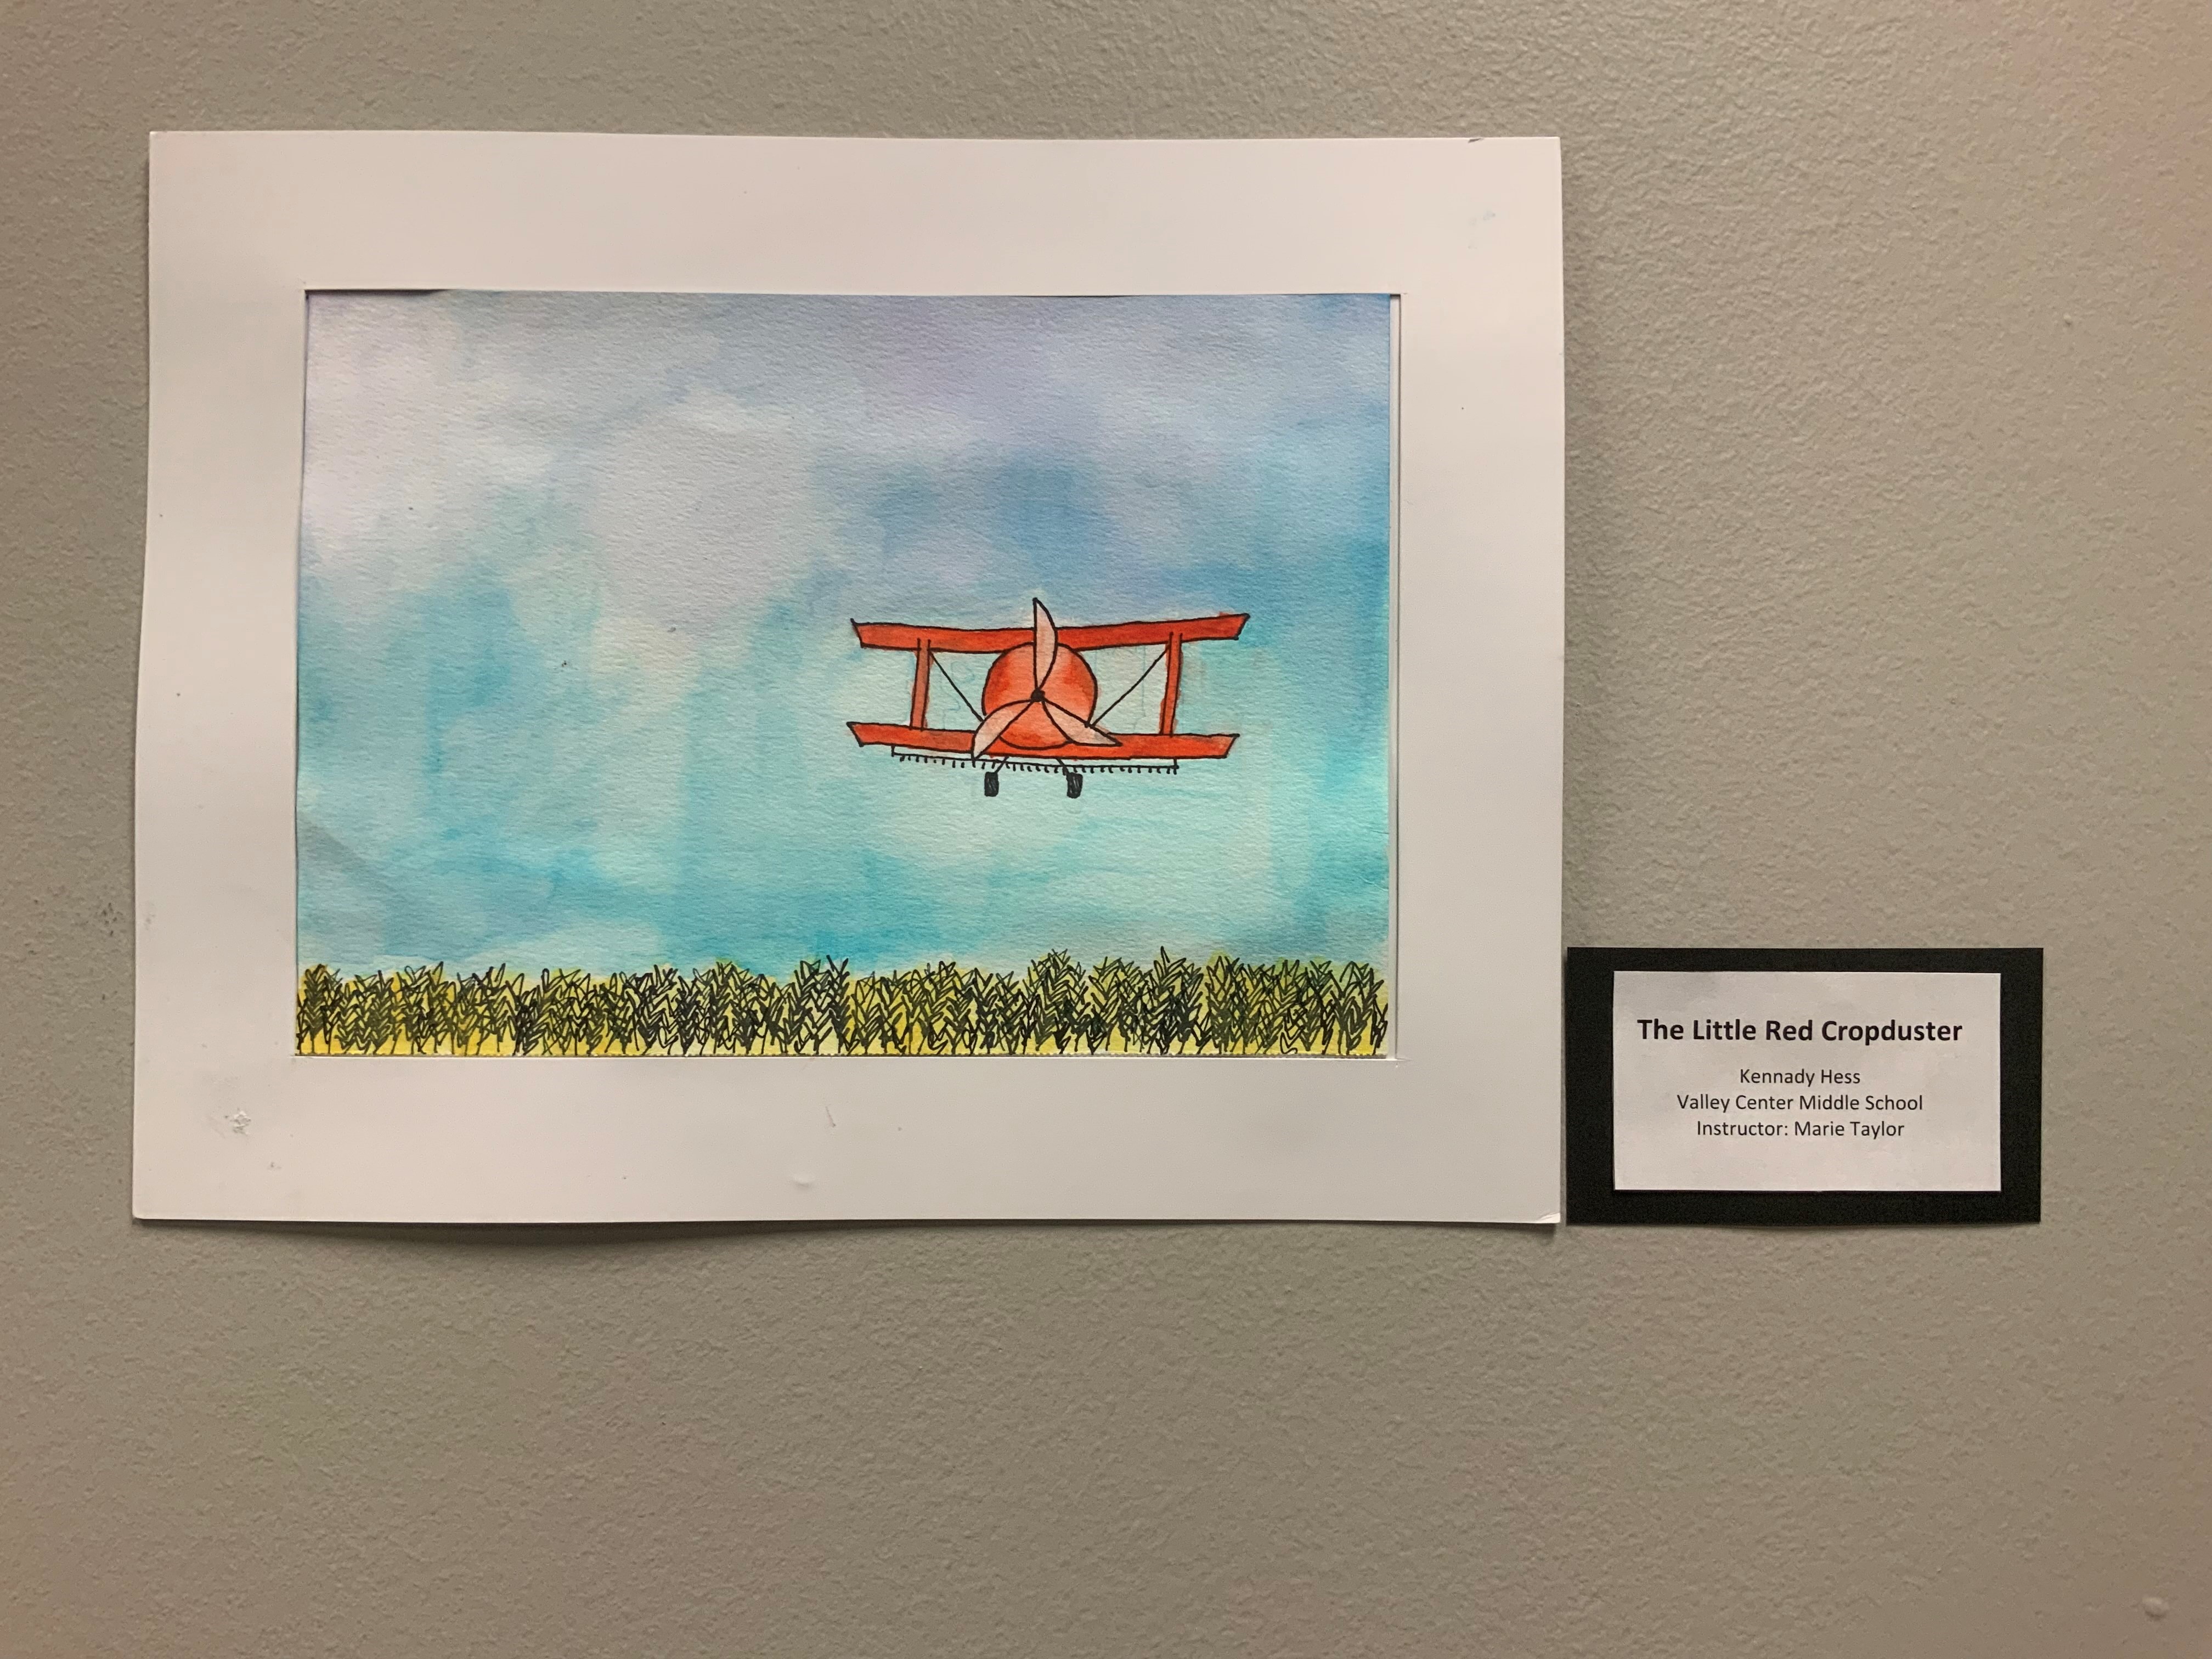 The Little Red Cropduster by Kennedy Hess